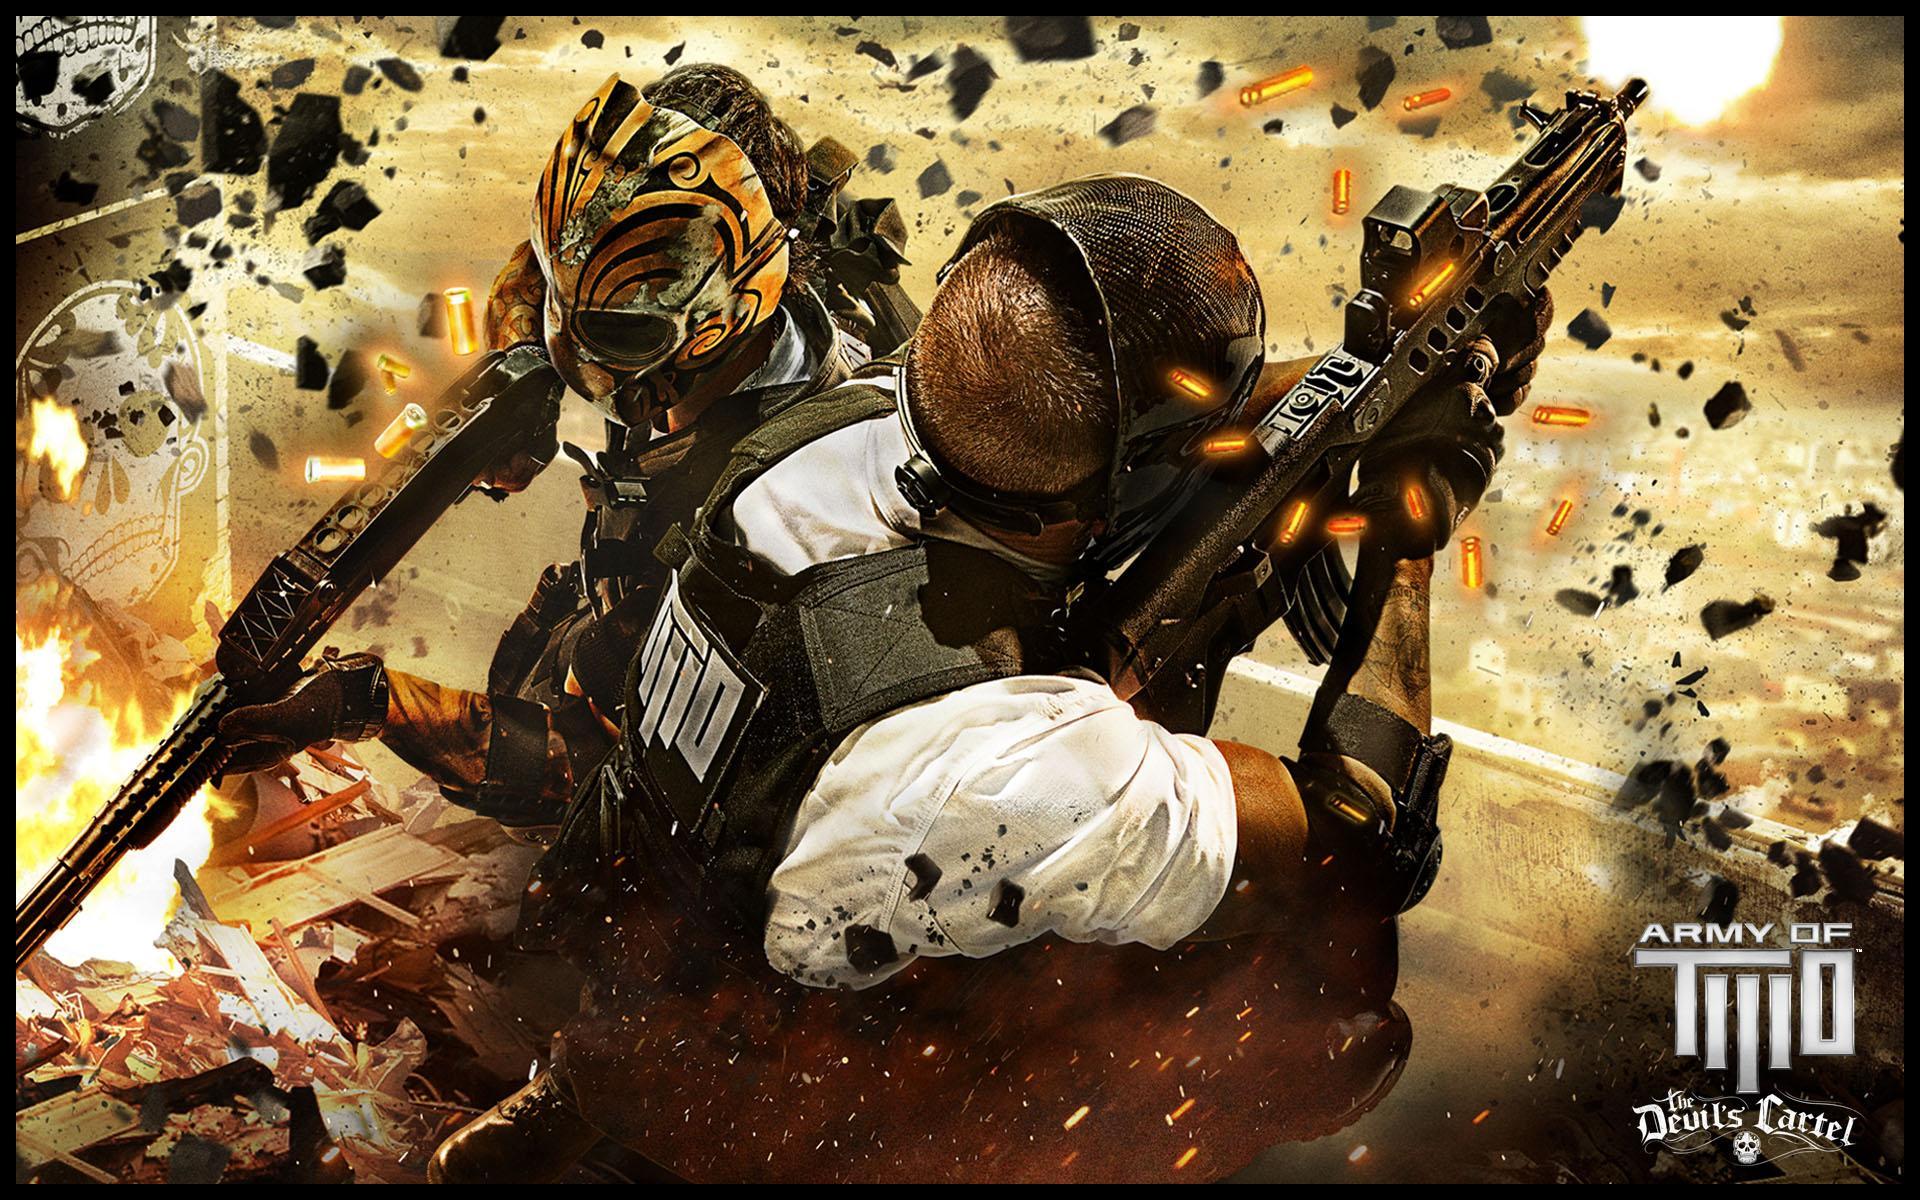 Army Of Two: The Devil's Cartel #19